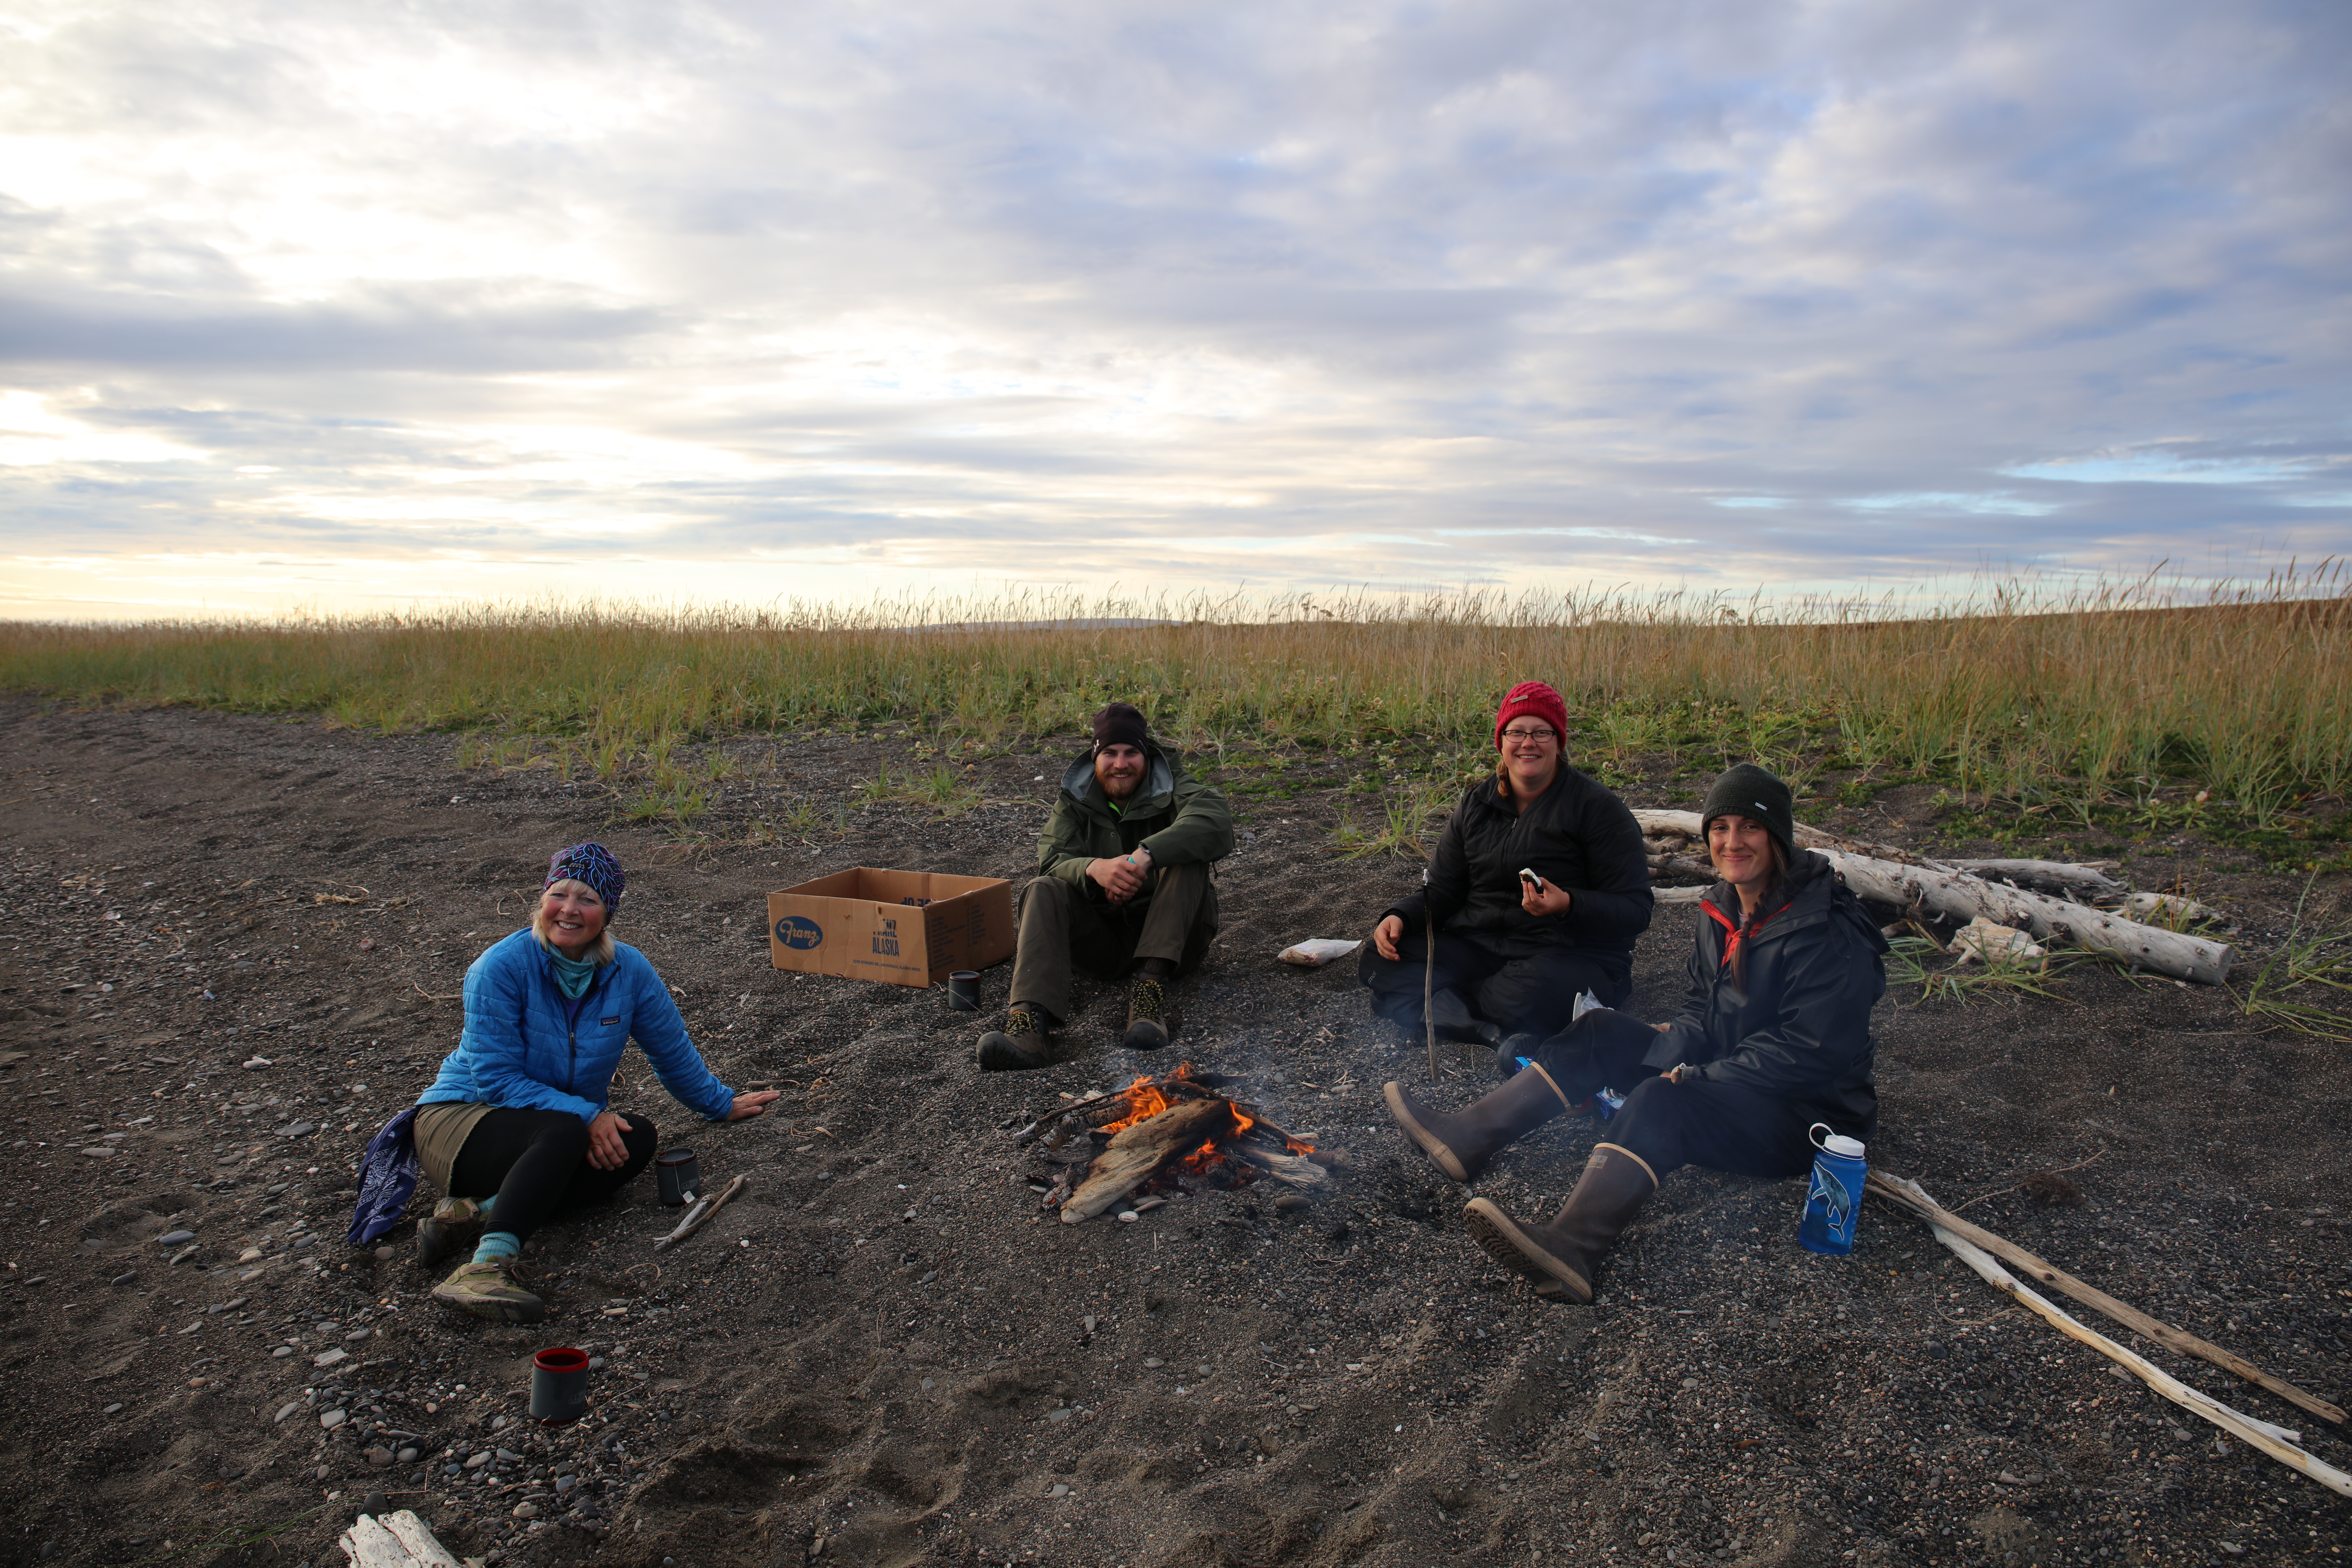 Three females and one male sit on the gravel beach next to a burning campfire.